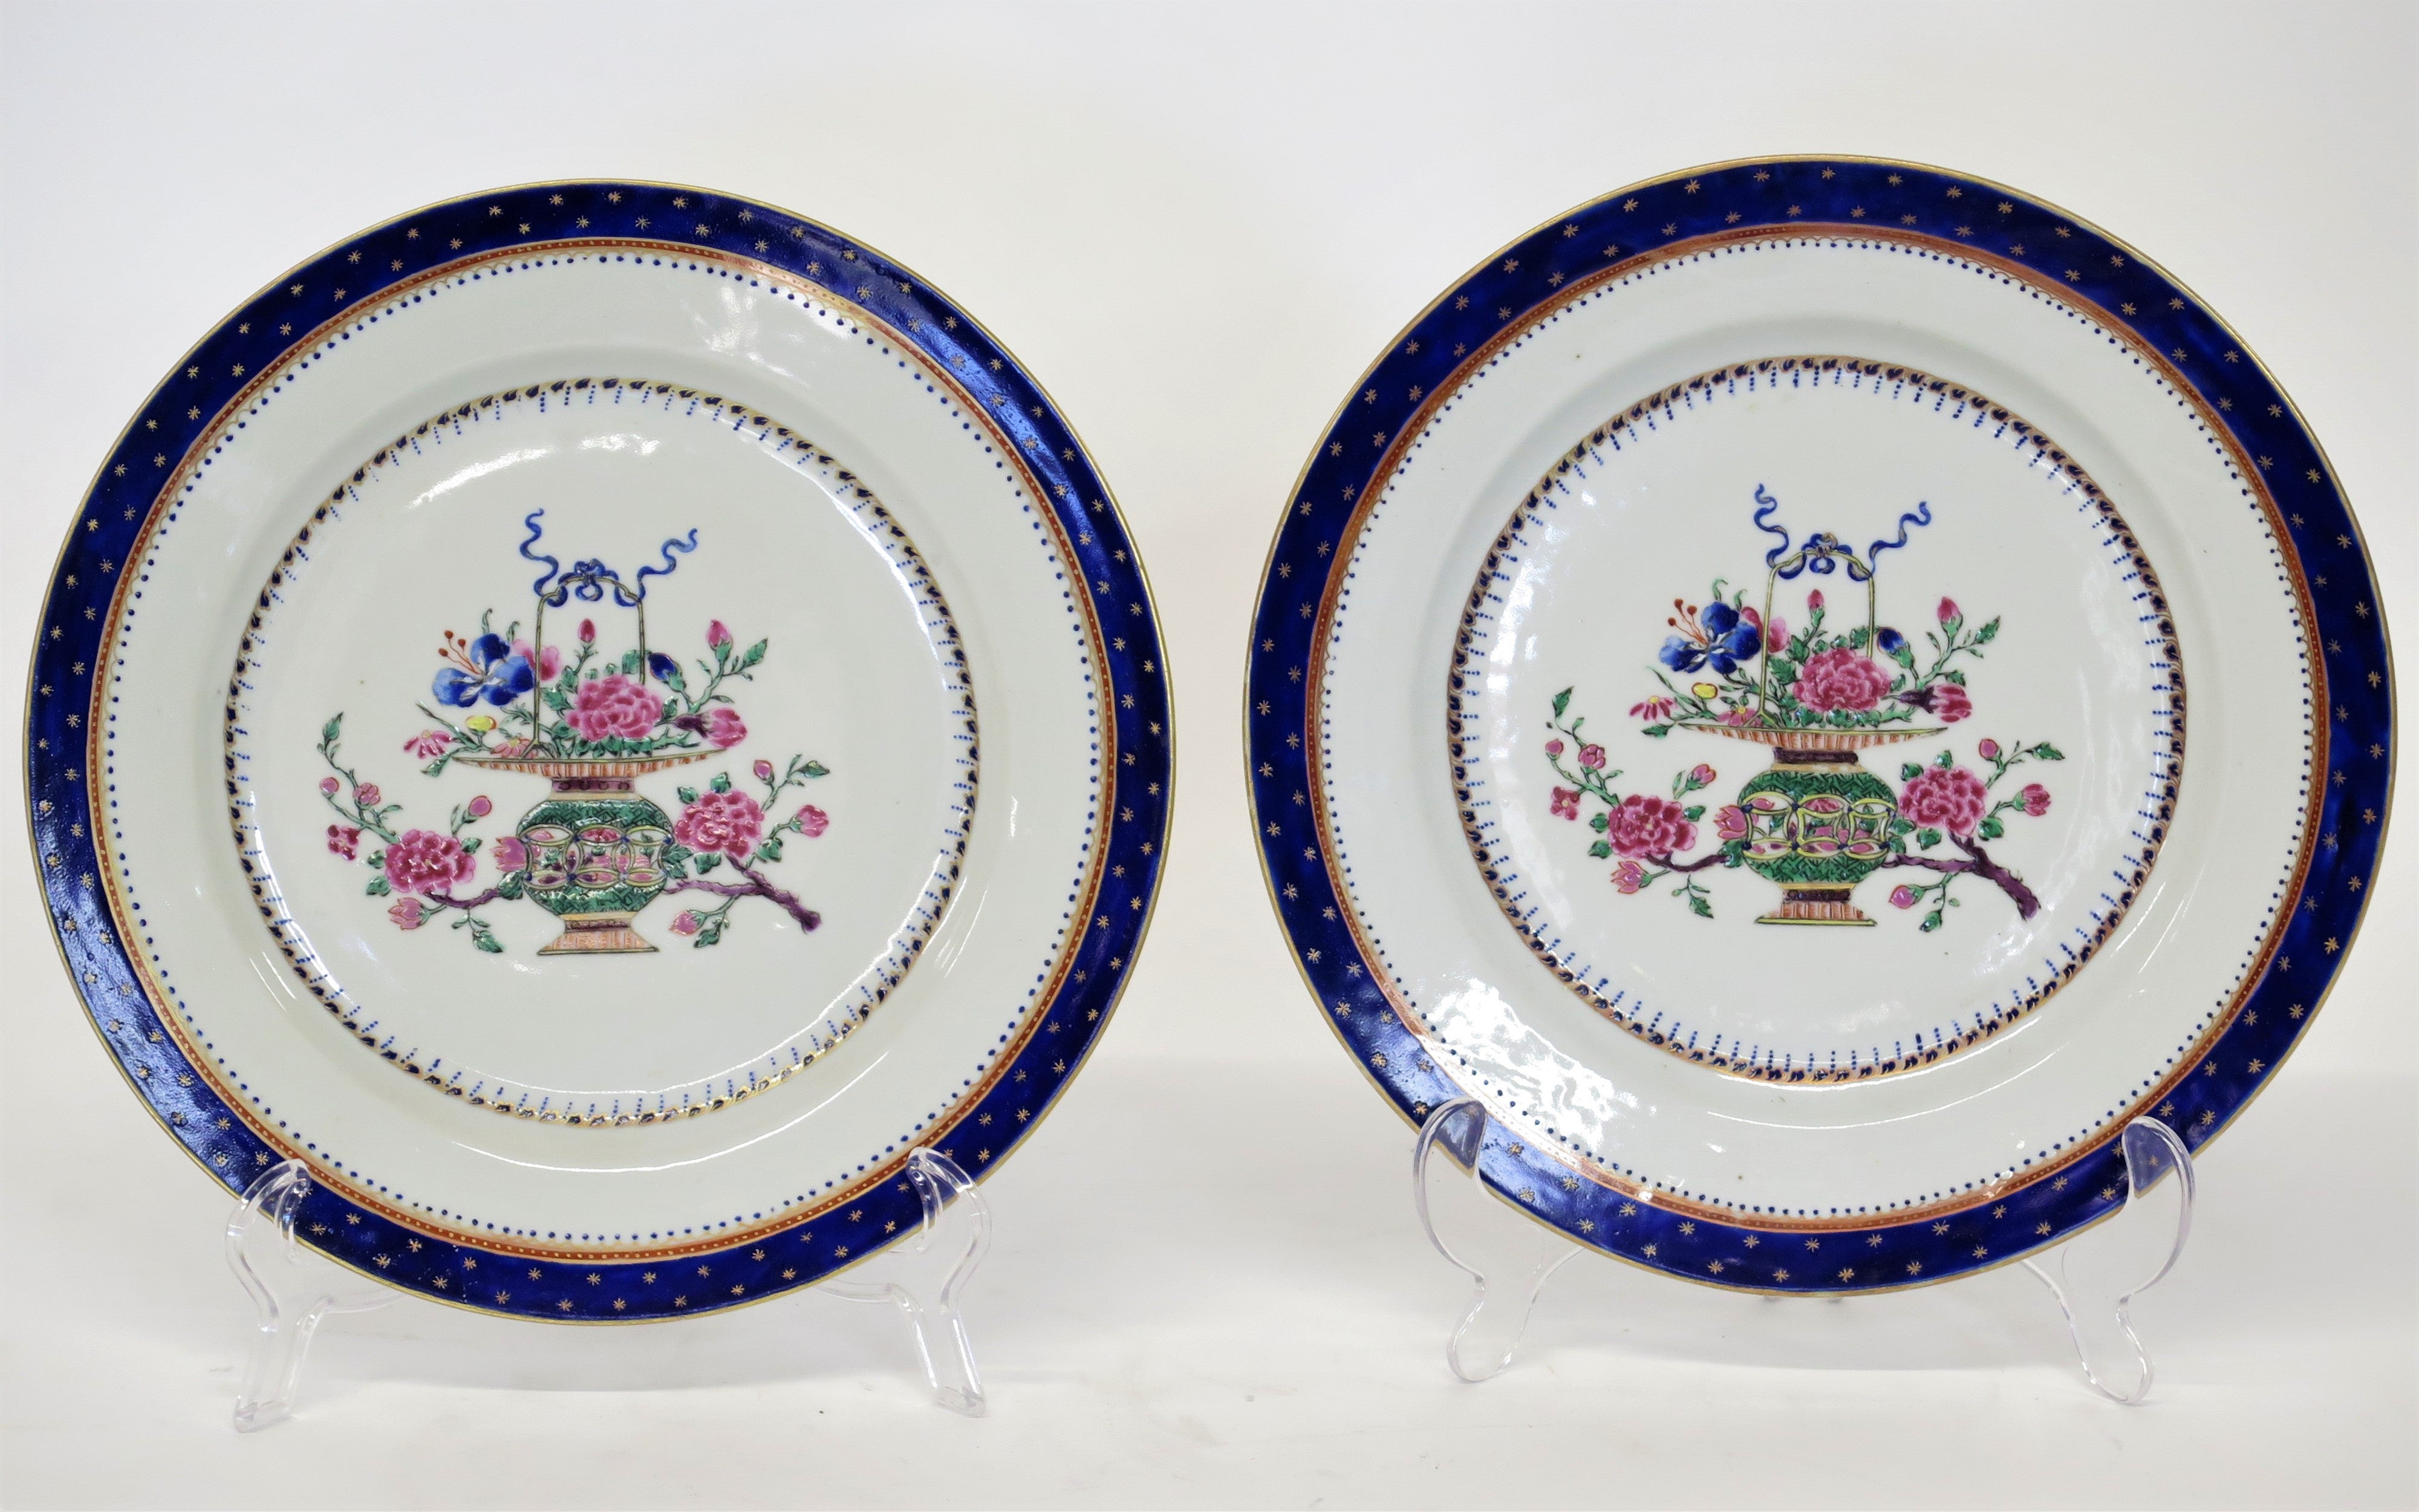 Pair of Chinese Export Plates with Floral Bouquet and Flowering Bough